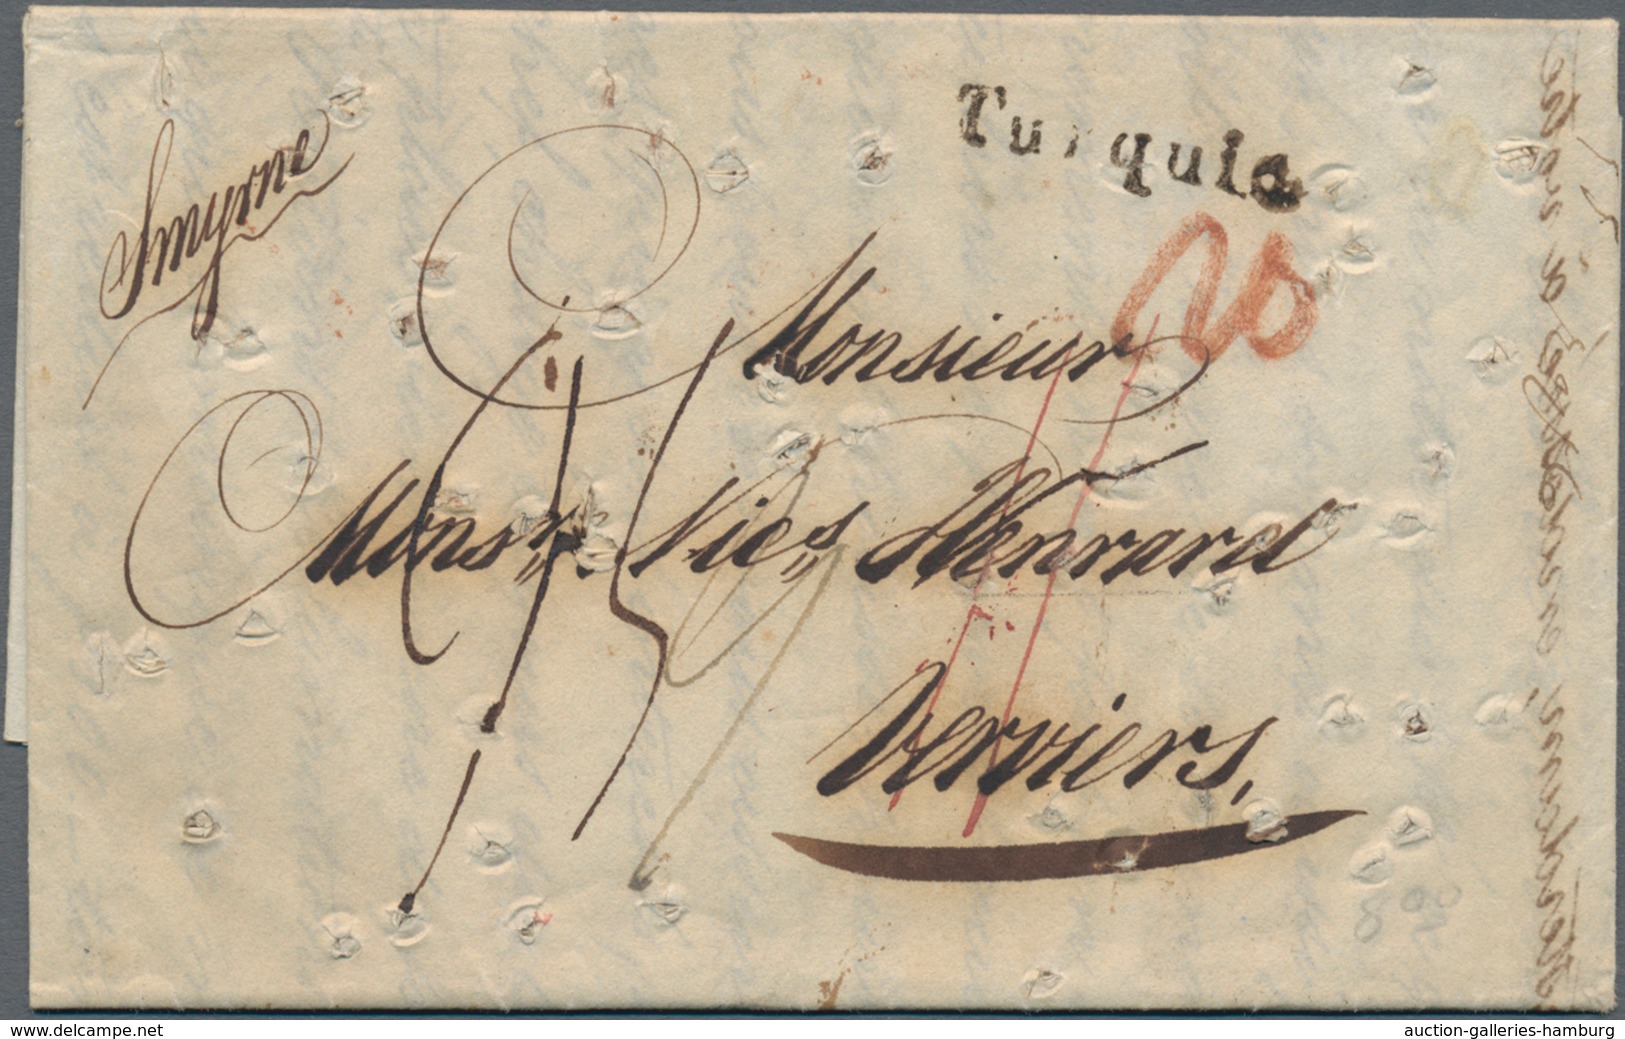 Türkei - Vorphilatelie: 1830, Folded Letter From Smyrna With L1 "Turquia" To Verviers With Red Handw - ...-1858 Prephilately